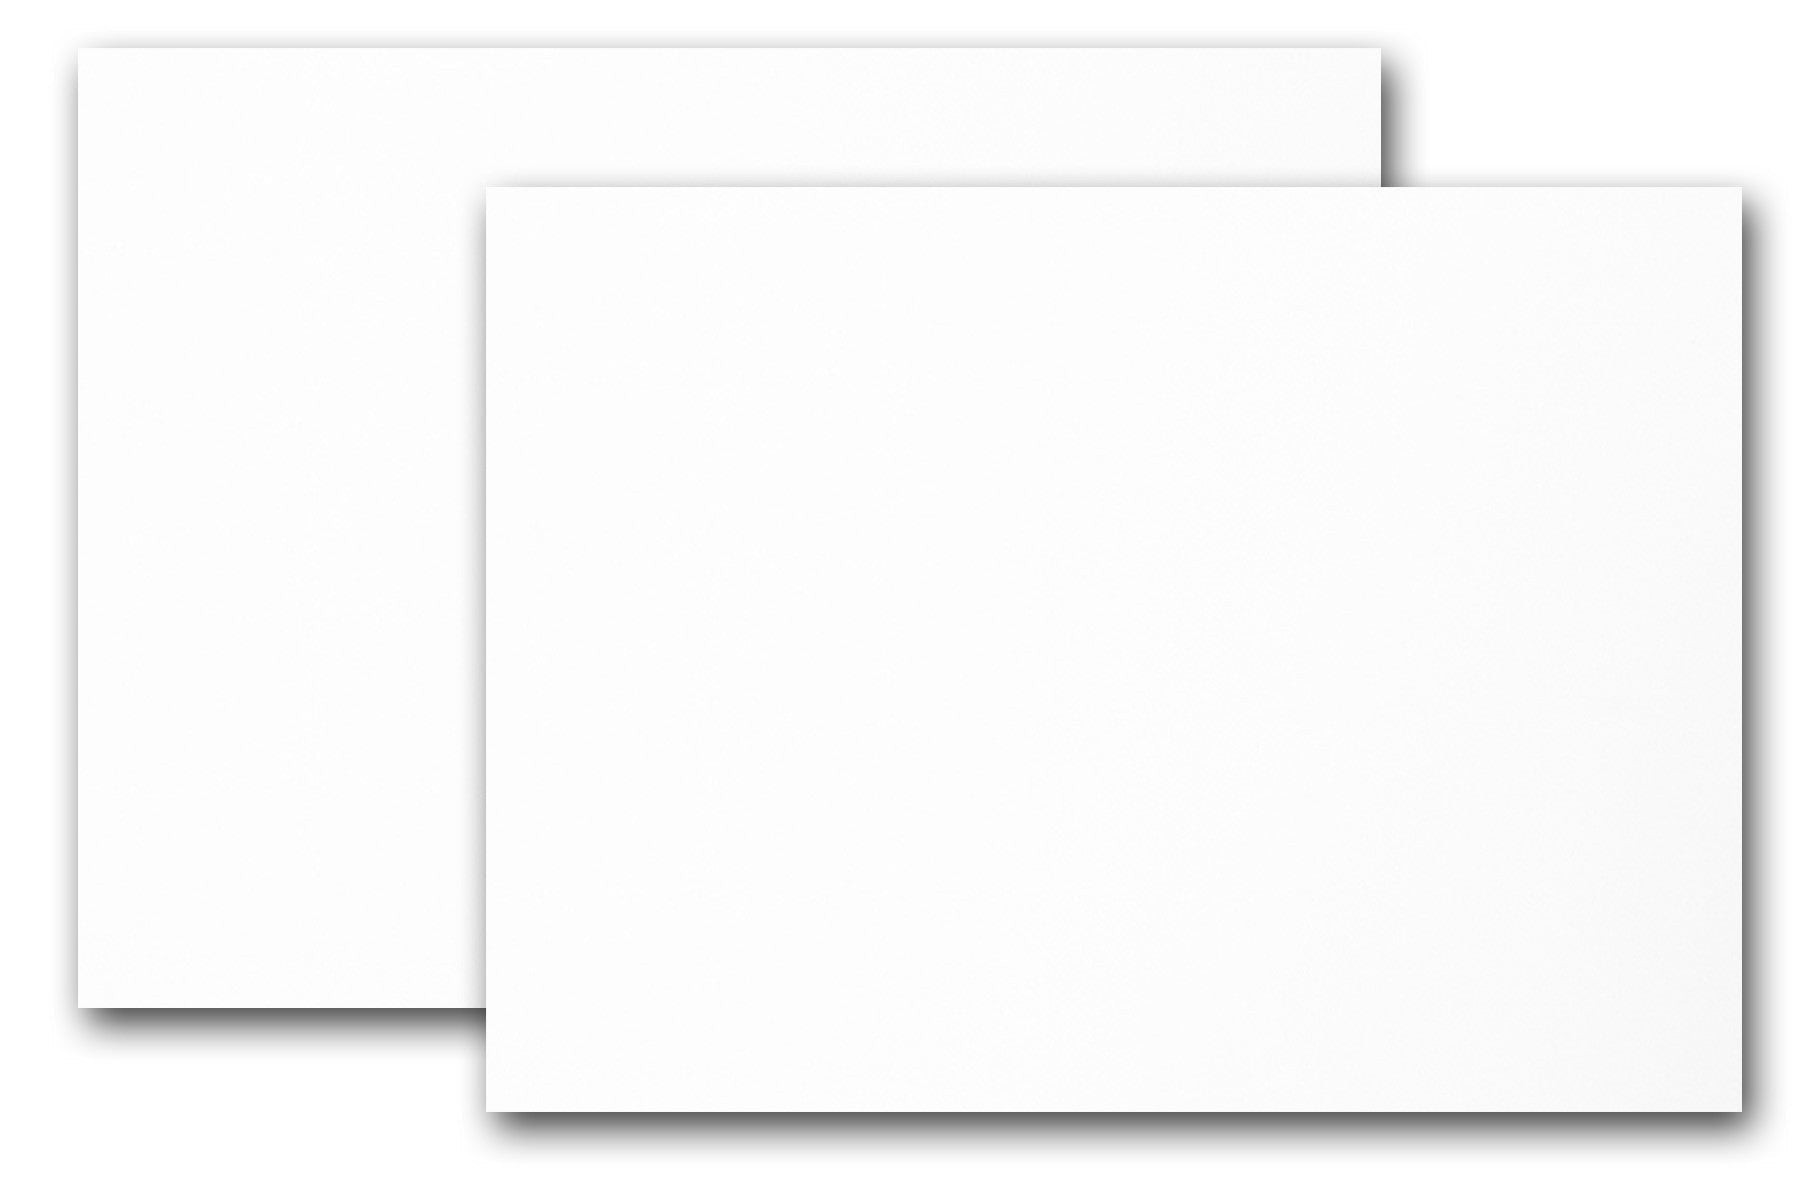 Thick Cardstock - 110lb Cover - (8.5